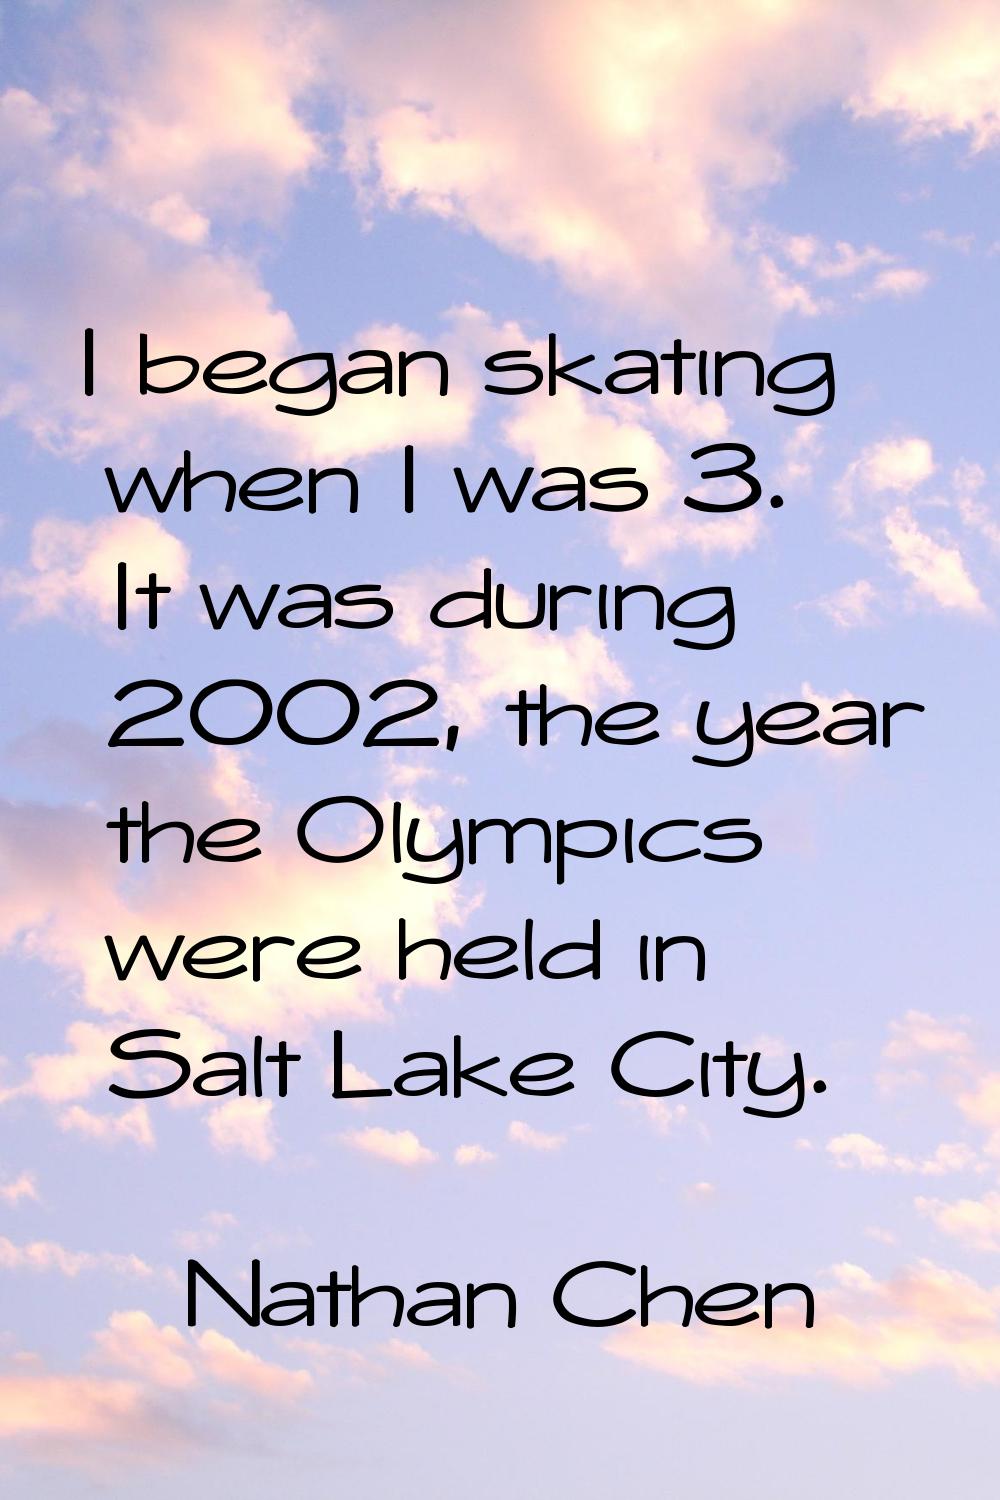 I began skating when I was 3. It was during 2002, the year the Olympics were held in Salt Lake City